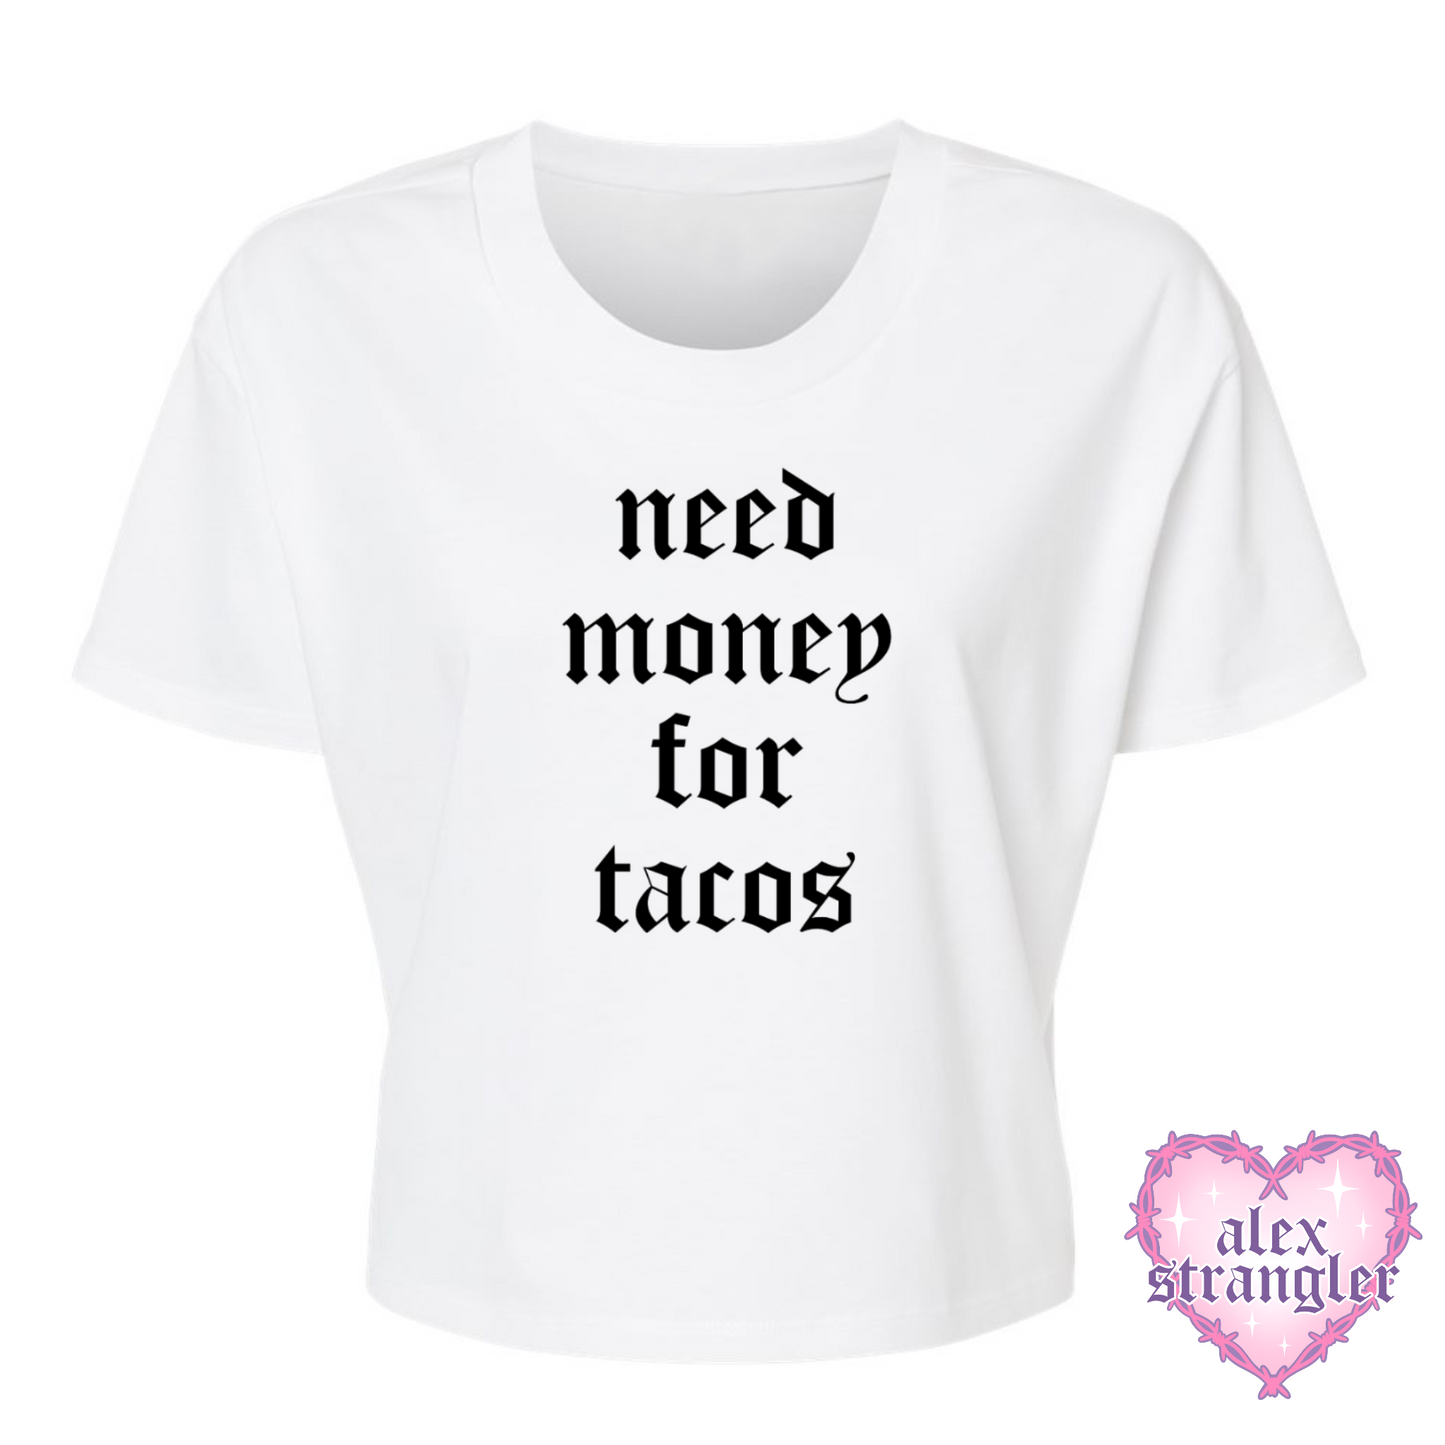 Need Money For Tacos - Alternative Women's Crop Tee *NEW STYLE*